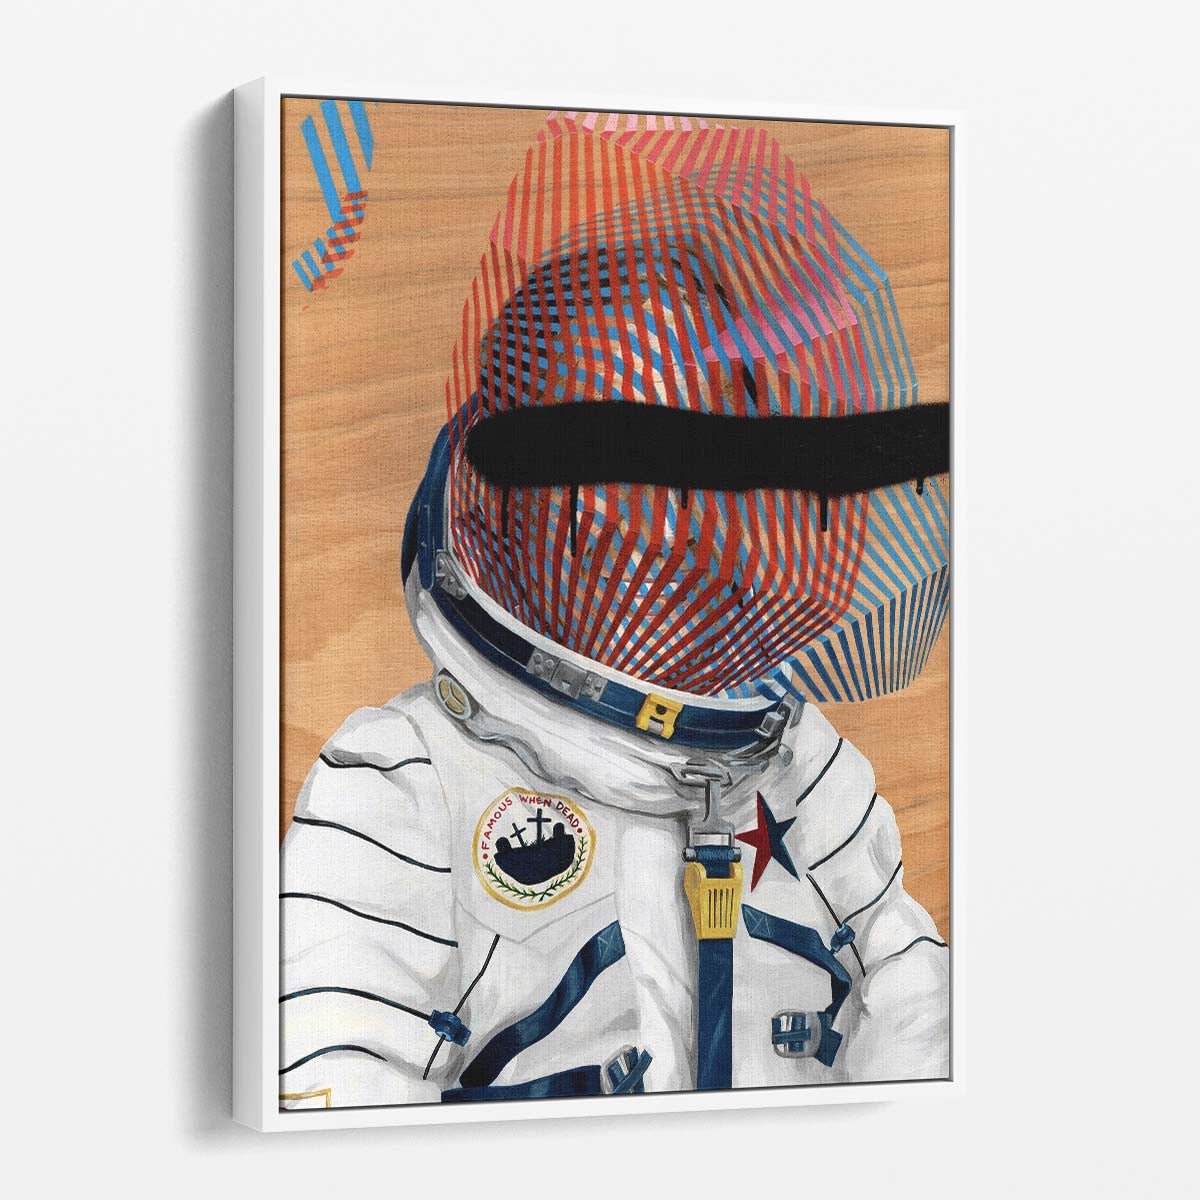 Surreal Spaceman Portrait Illustration by Famous When Dead on Wood by Luxuriance Designs, made in USA